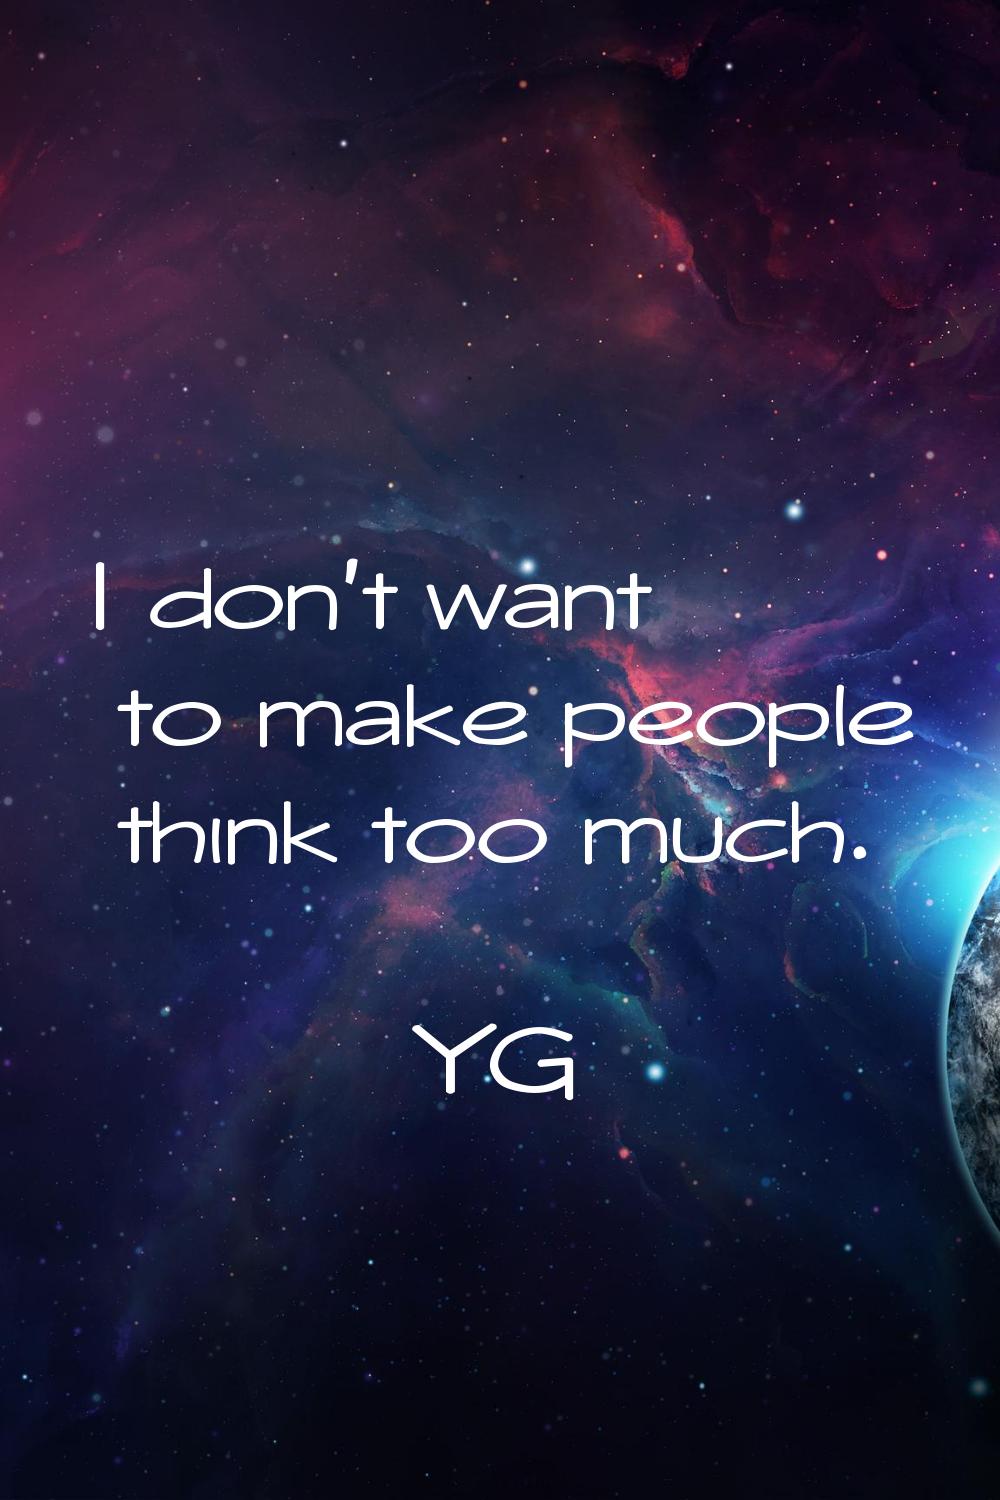 I don't want to make people think too much.